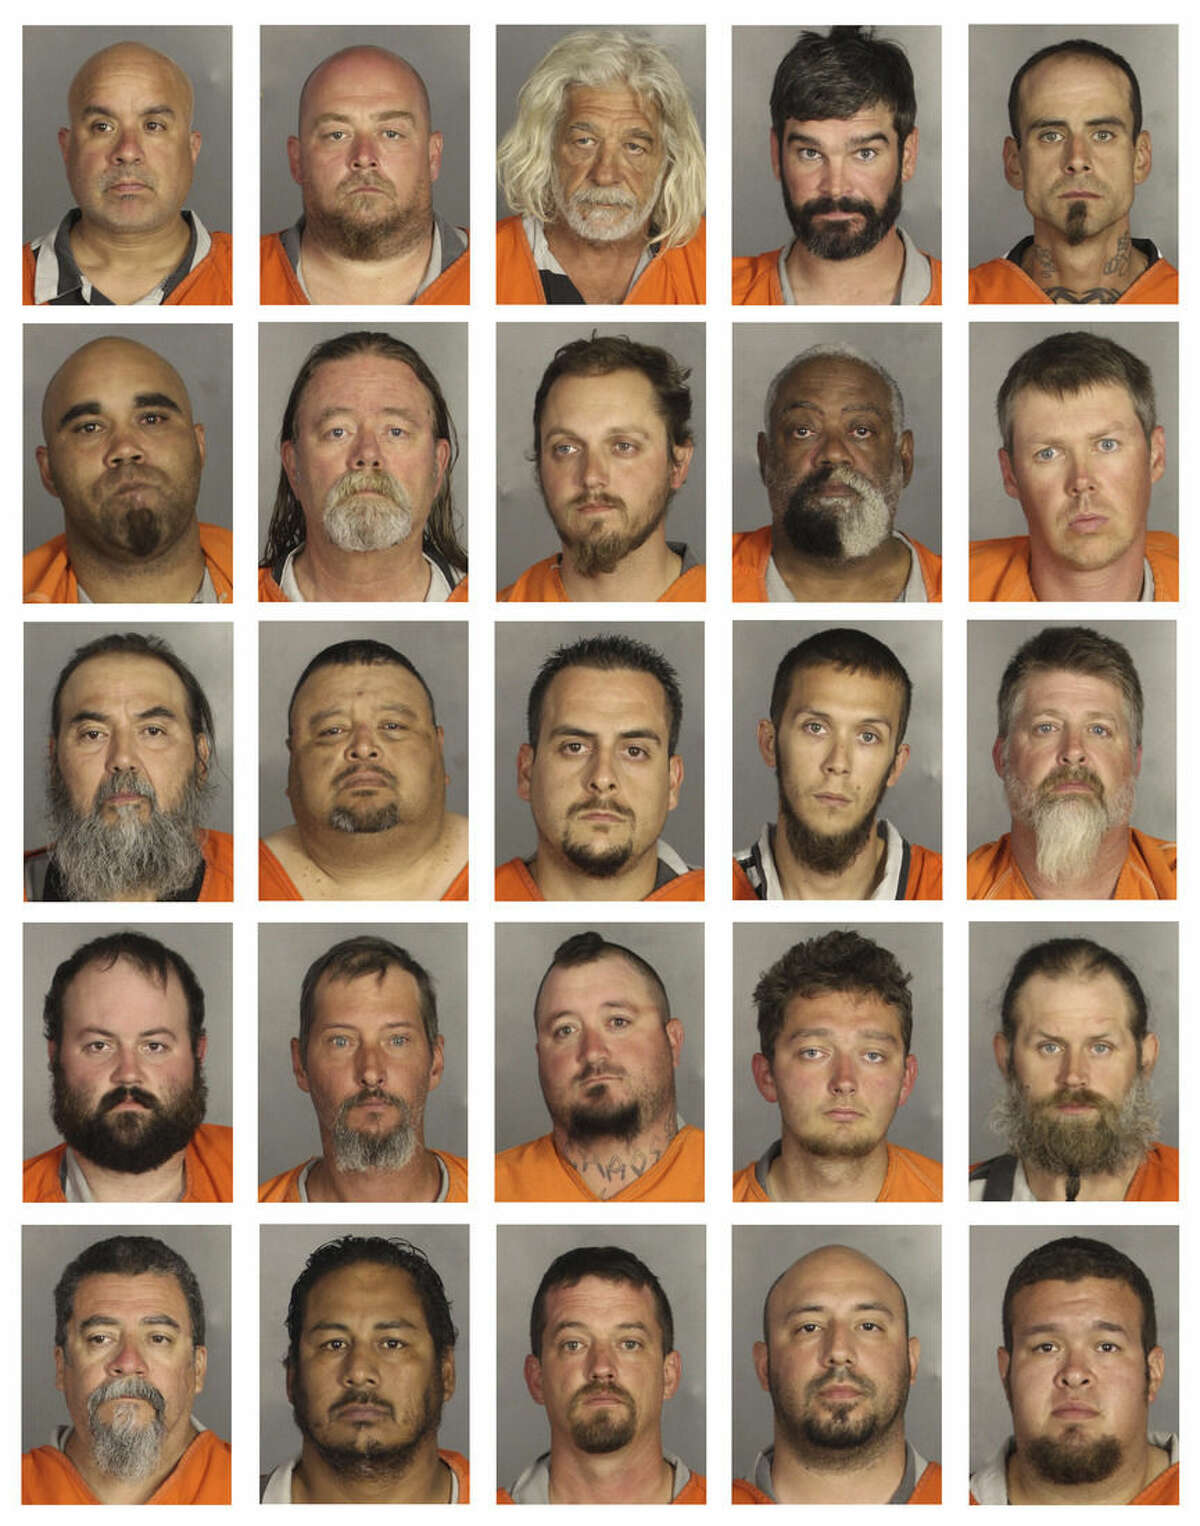 Wife of biker inmate: Some arrested in Texas are innocent